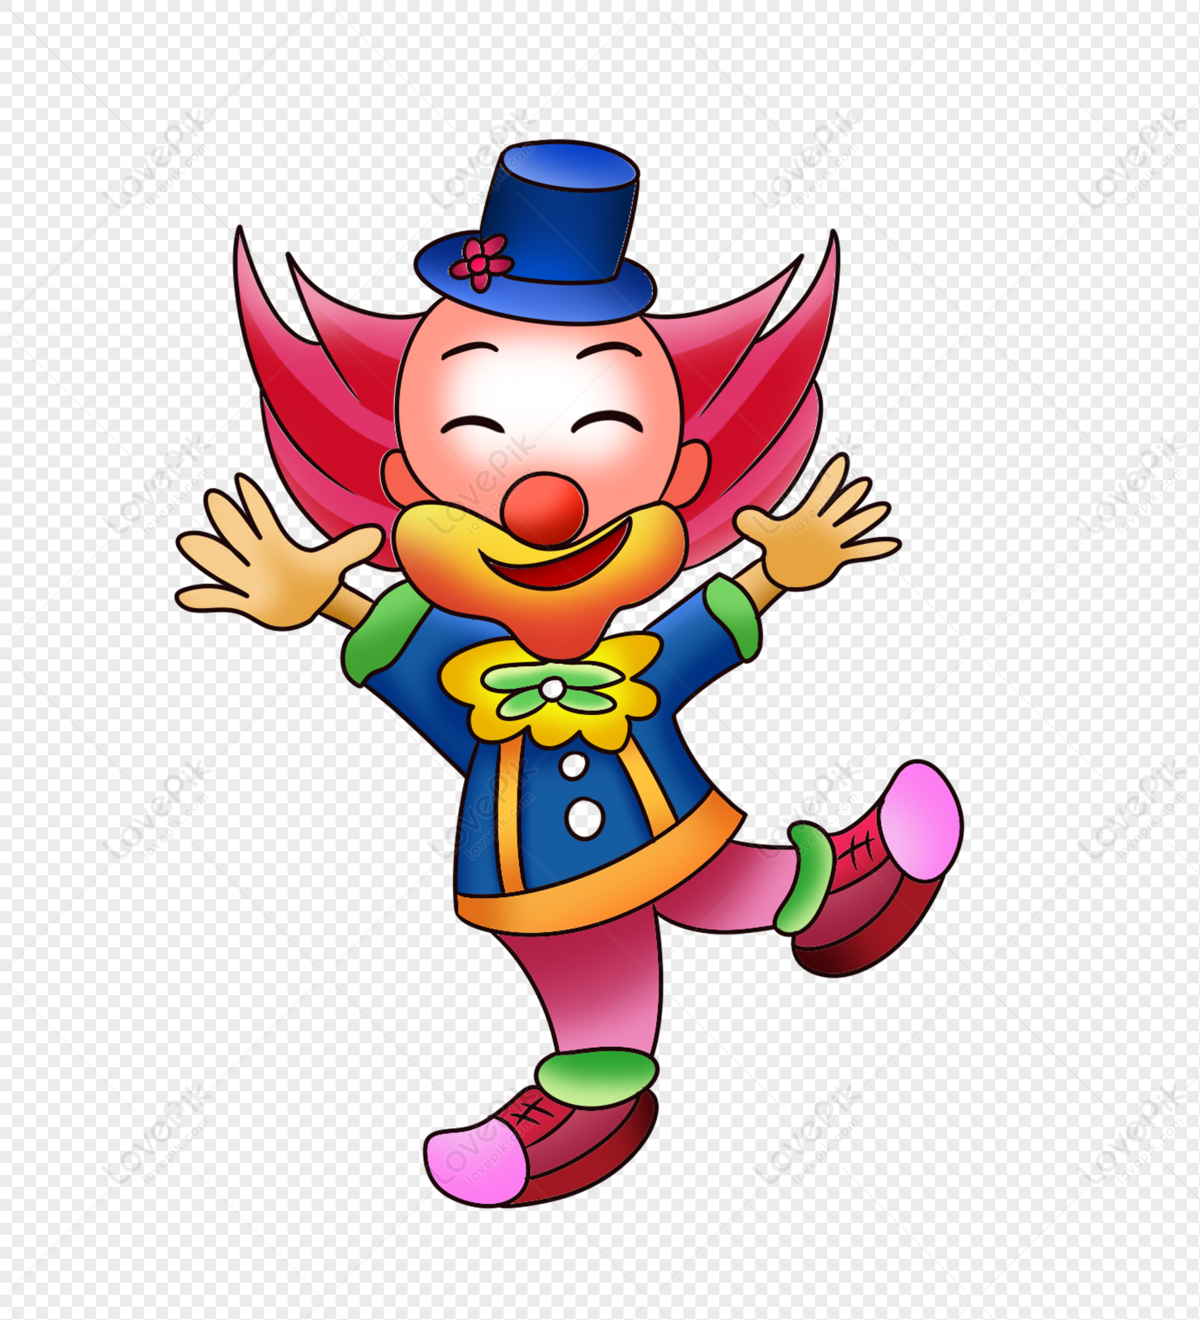 Dancing April Fools Day Joker PNG Image Free Download And Clipart ...